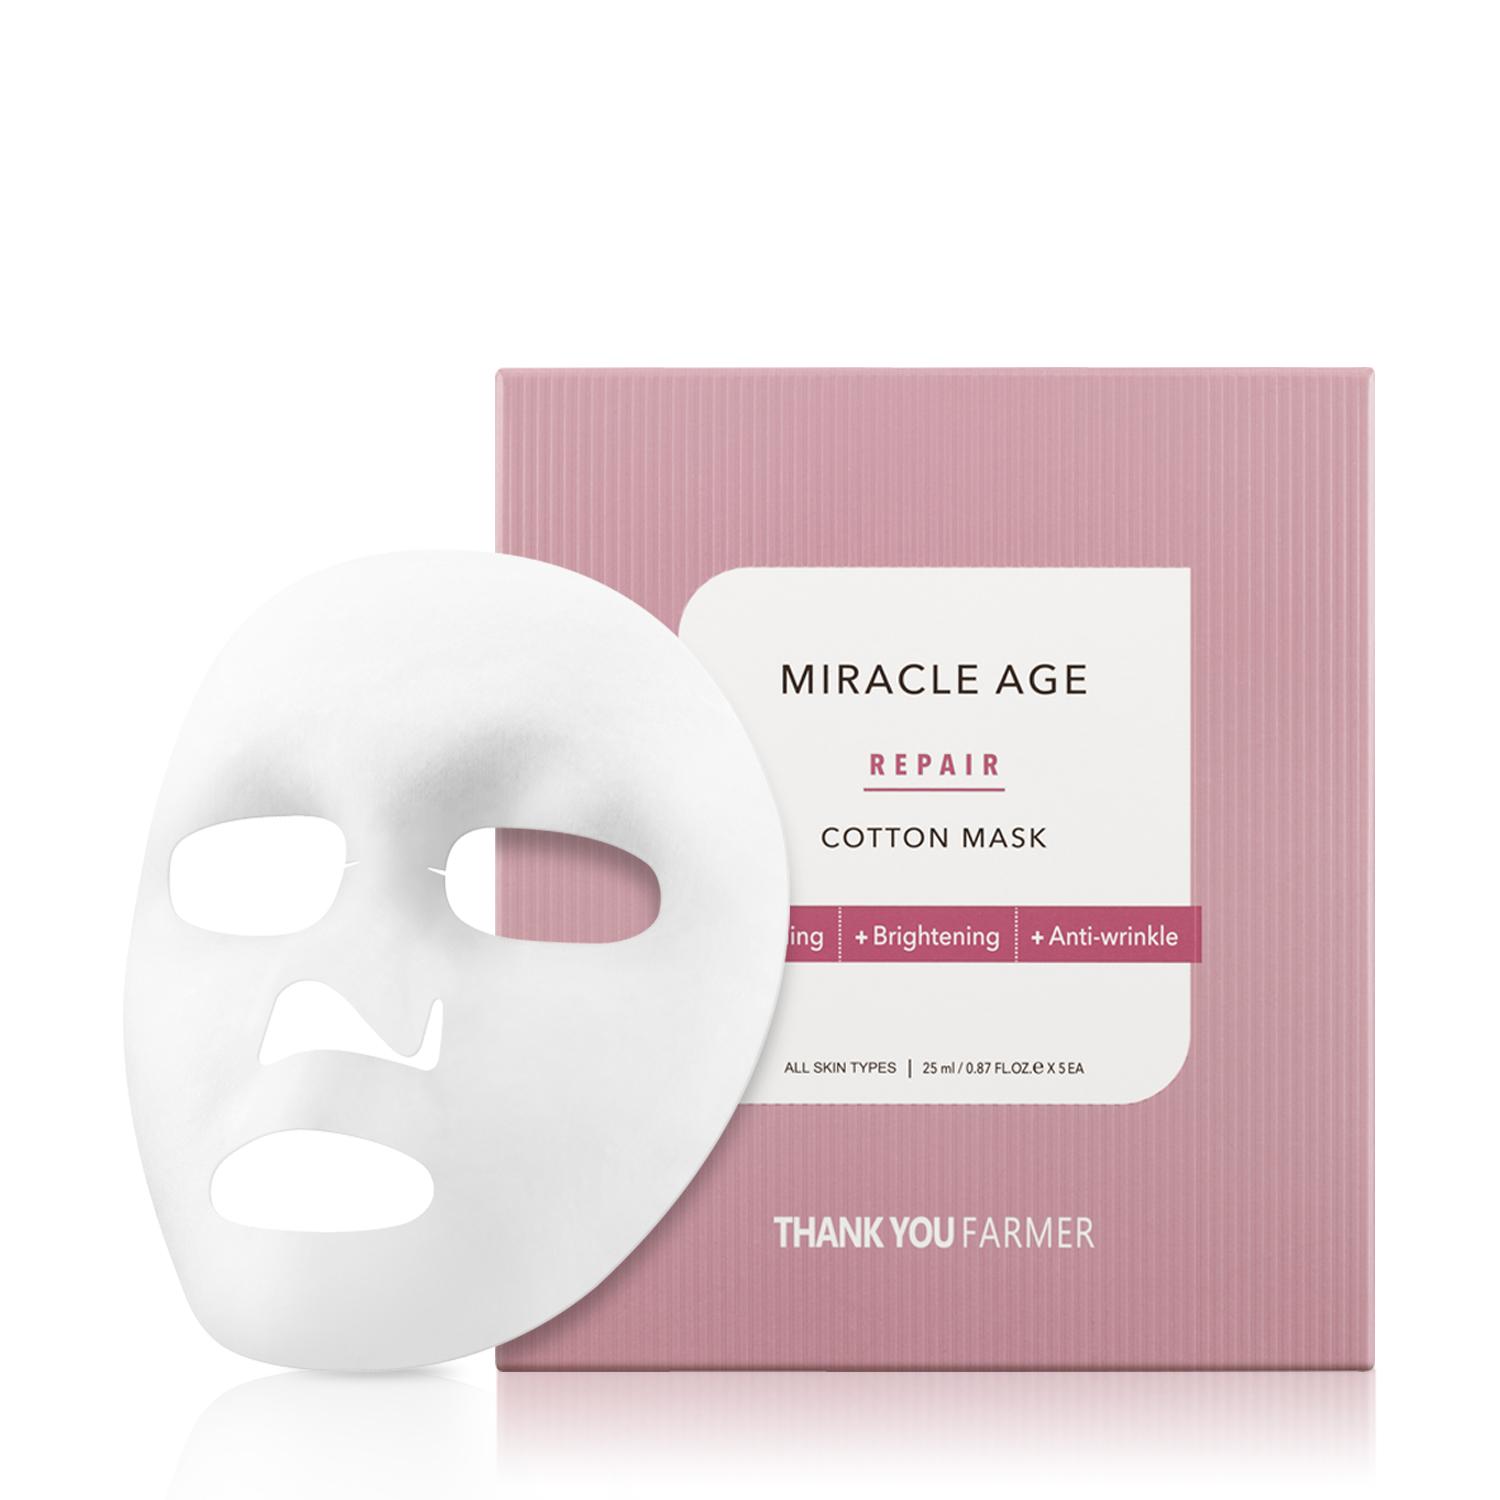 Miracle Age Repair Cotton Mask